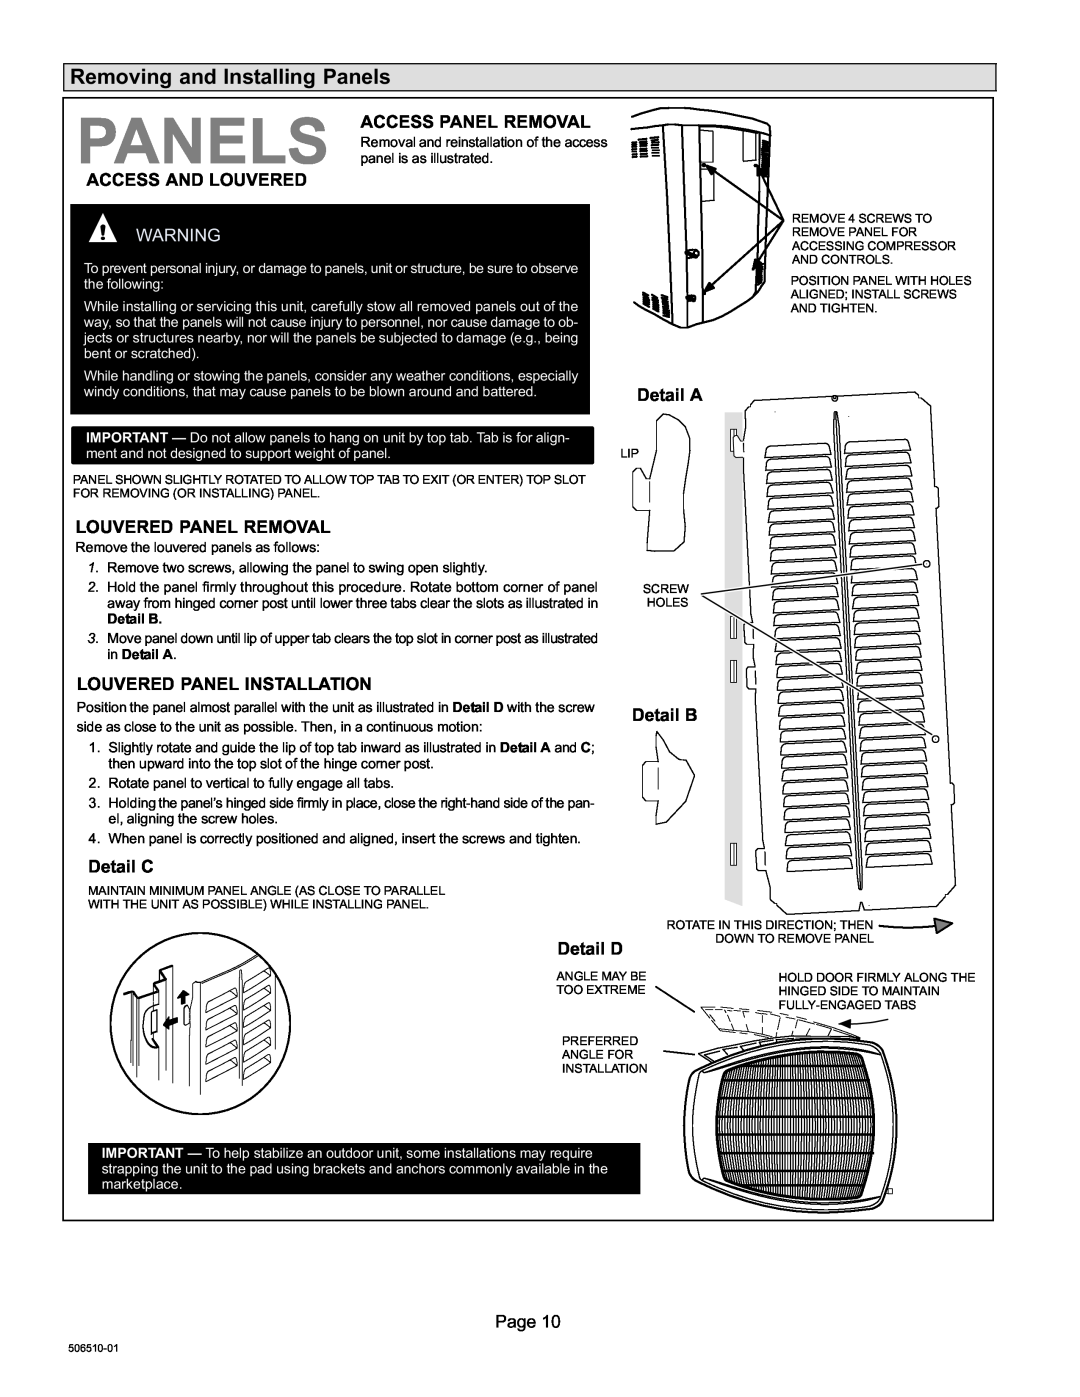 Lennox International Inc 506510-01 Removing and Installing Panels, Access Panel Removal, Access And Louvered, Detail A 